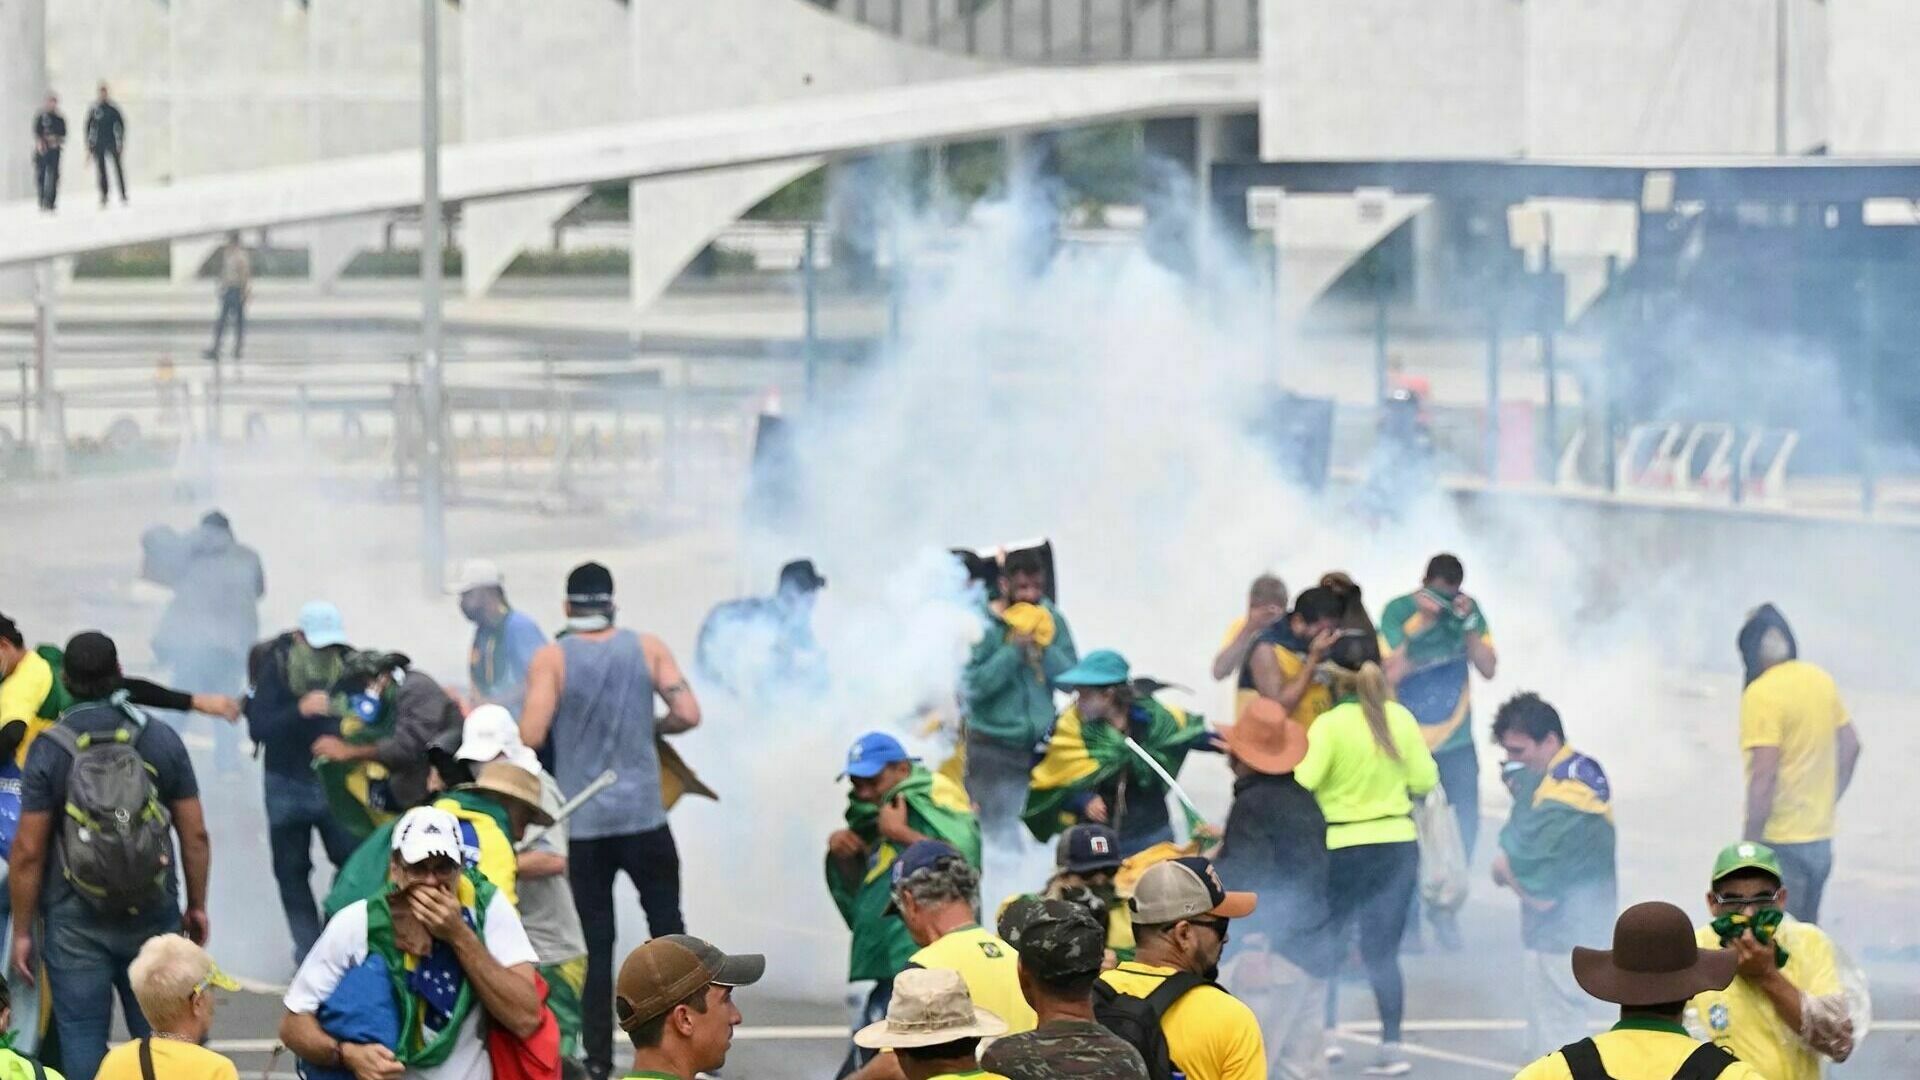 In Brazil, police took control of buildings seized by protesters